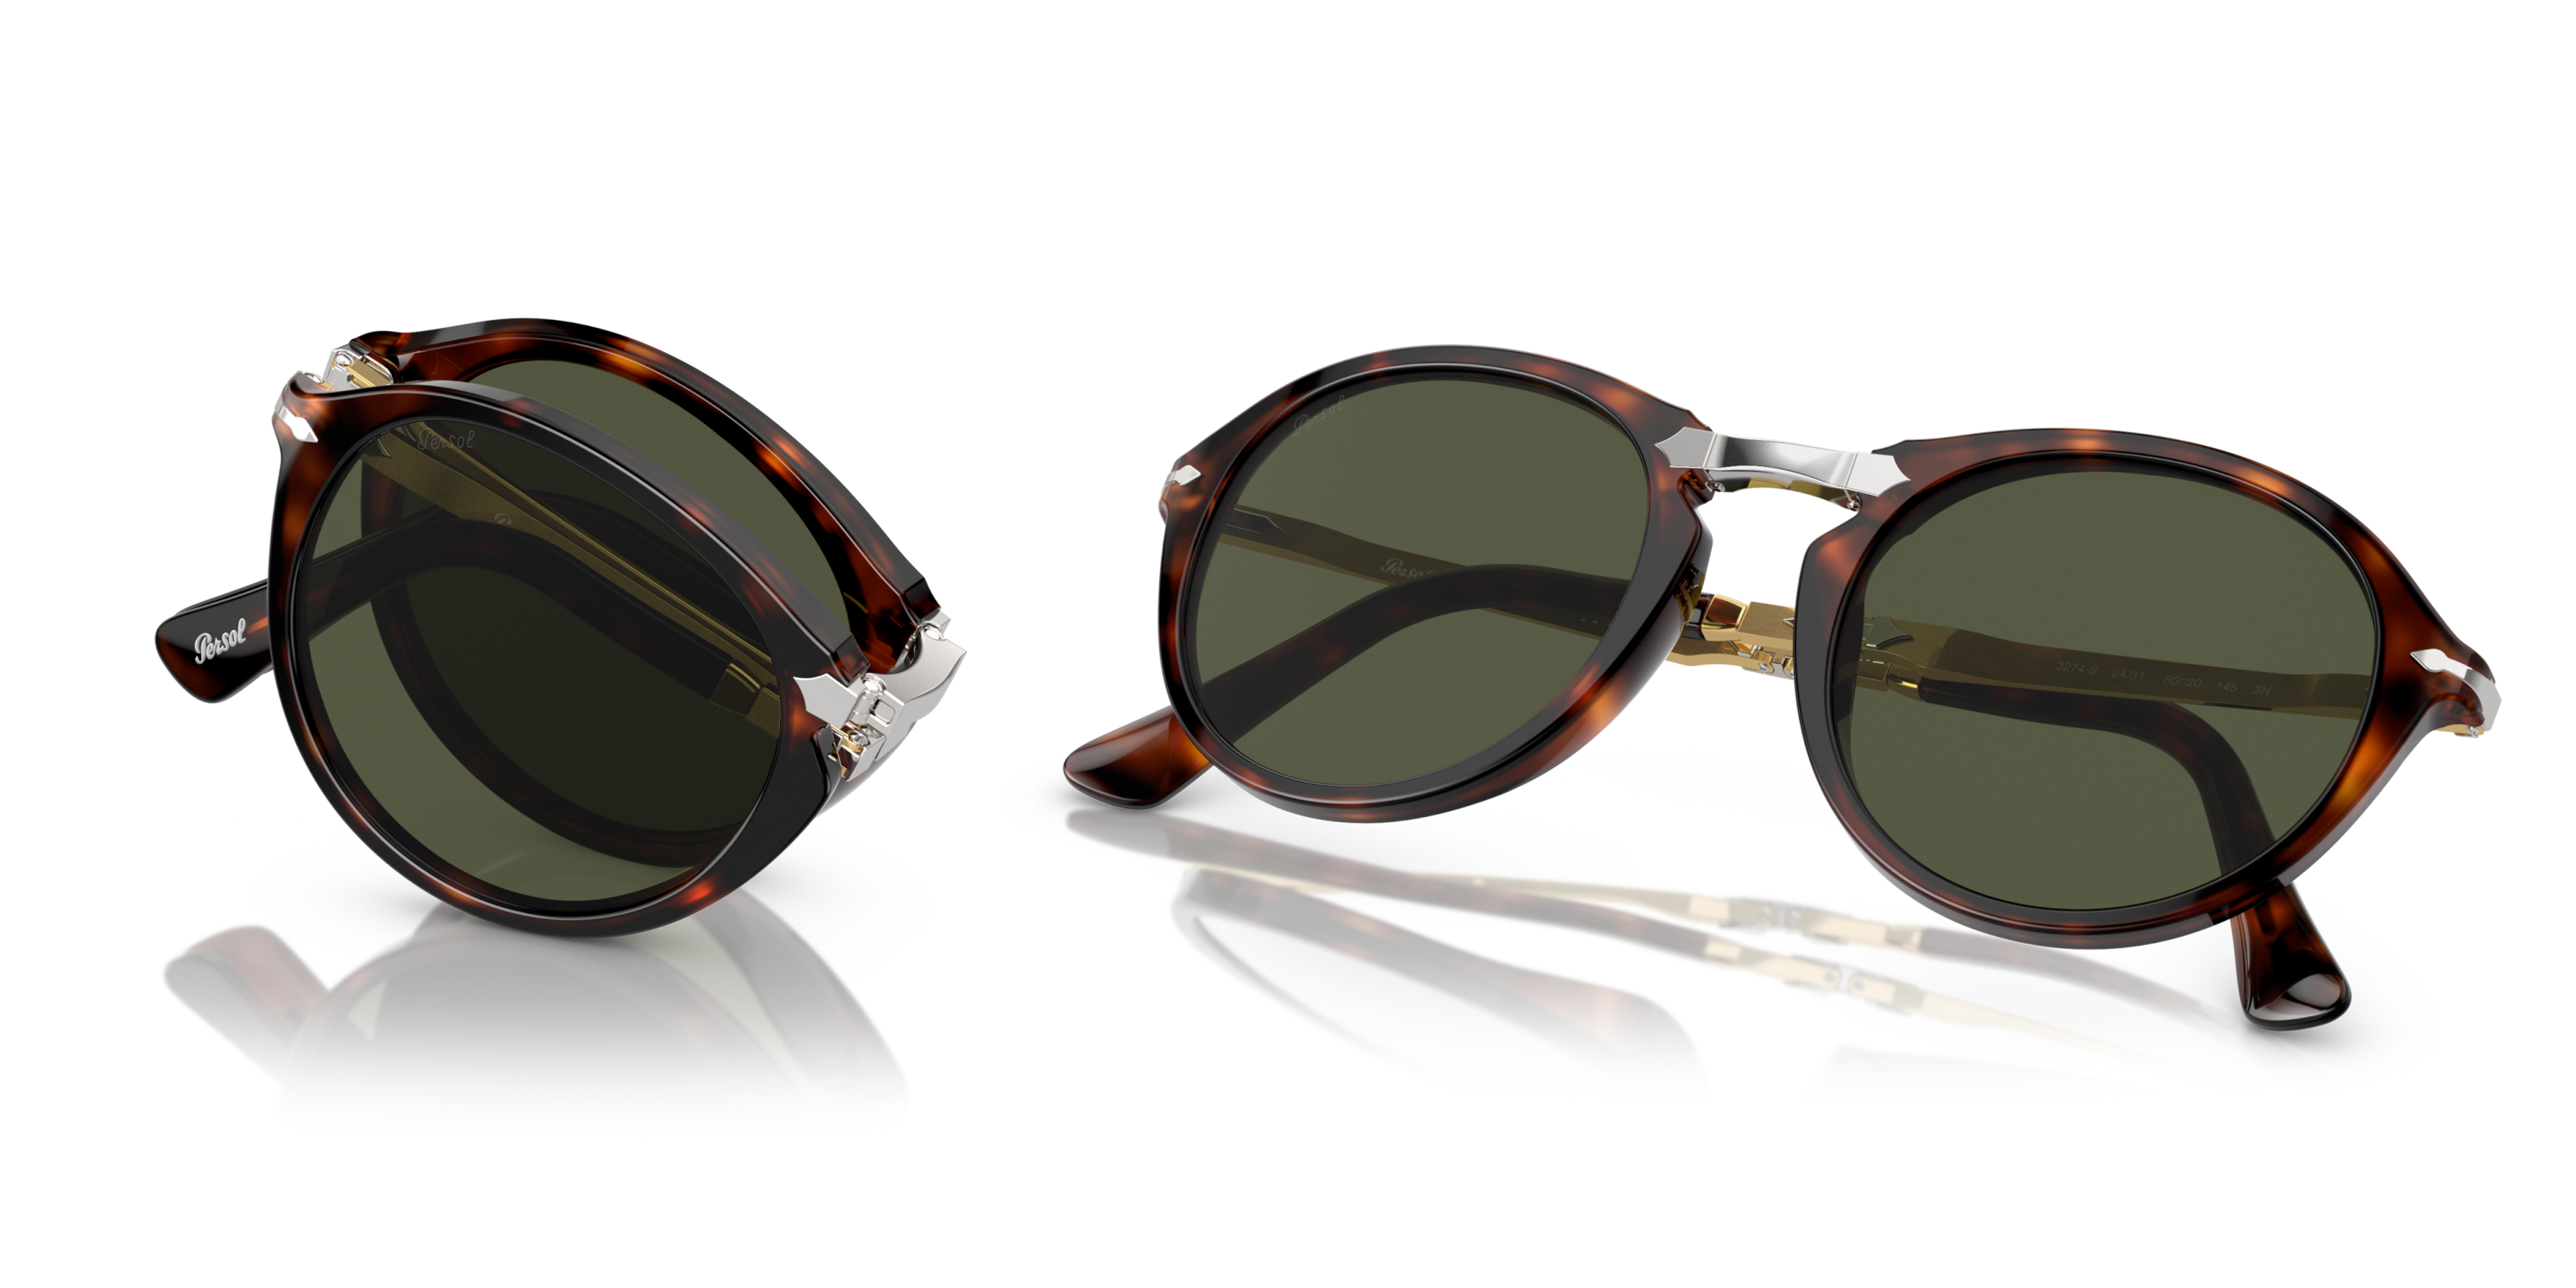 [products.image.detail05] PERSOL PO3274S 24/31